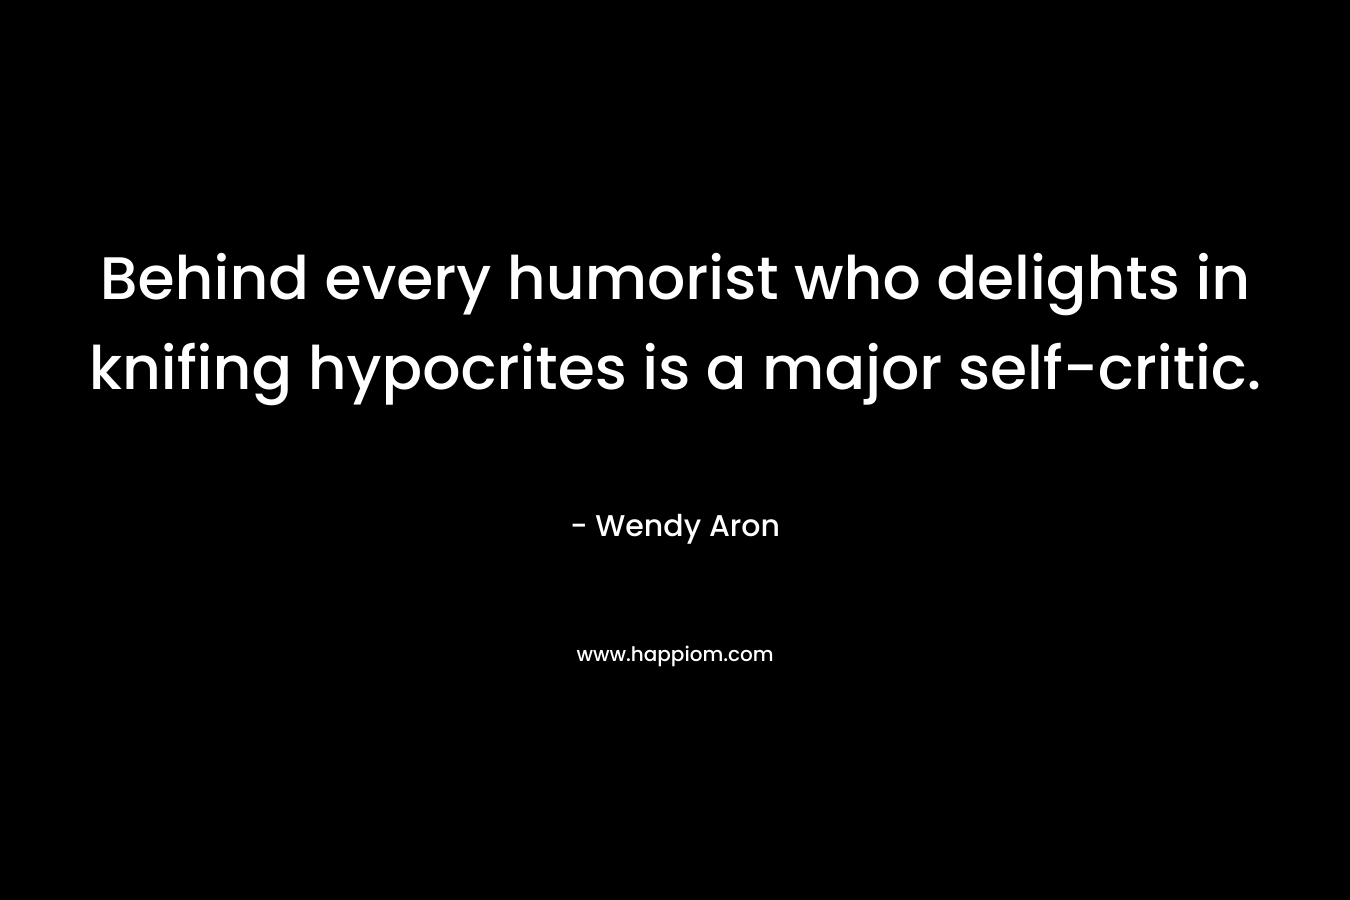 Behind every humorist who delights in knifing hypocrites is a major self-critic. – Wendy Aron